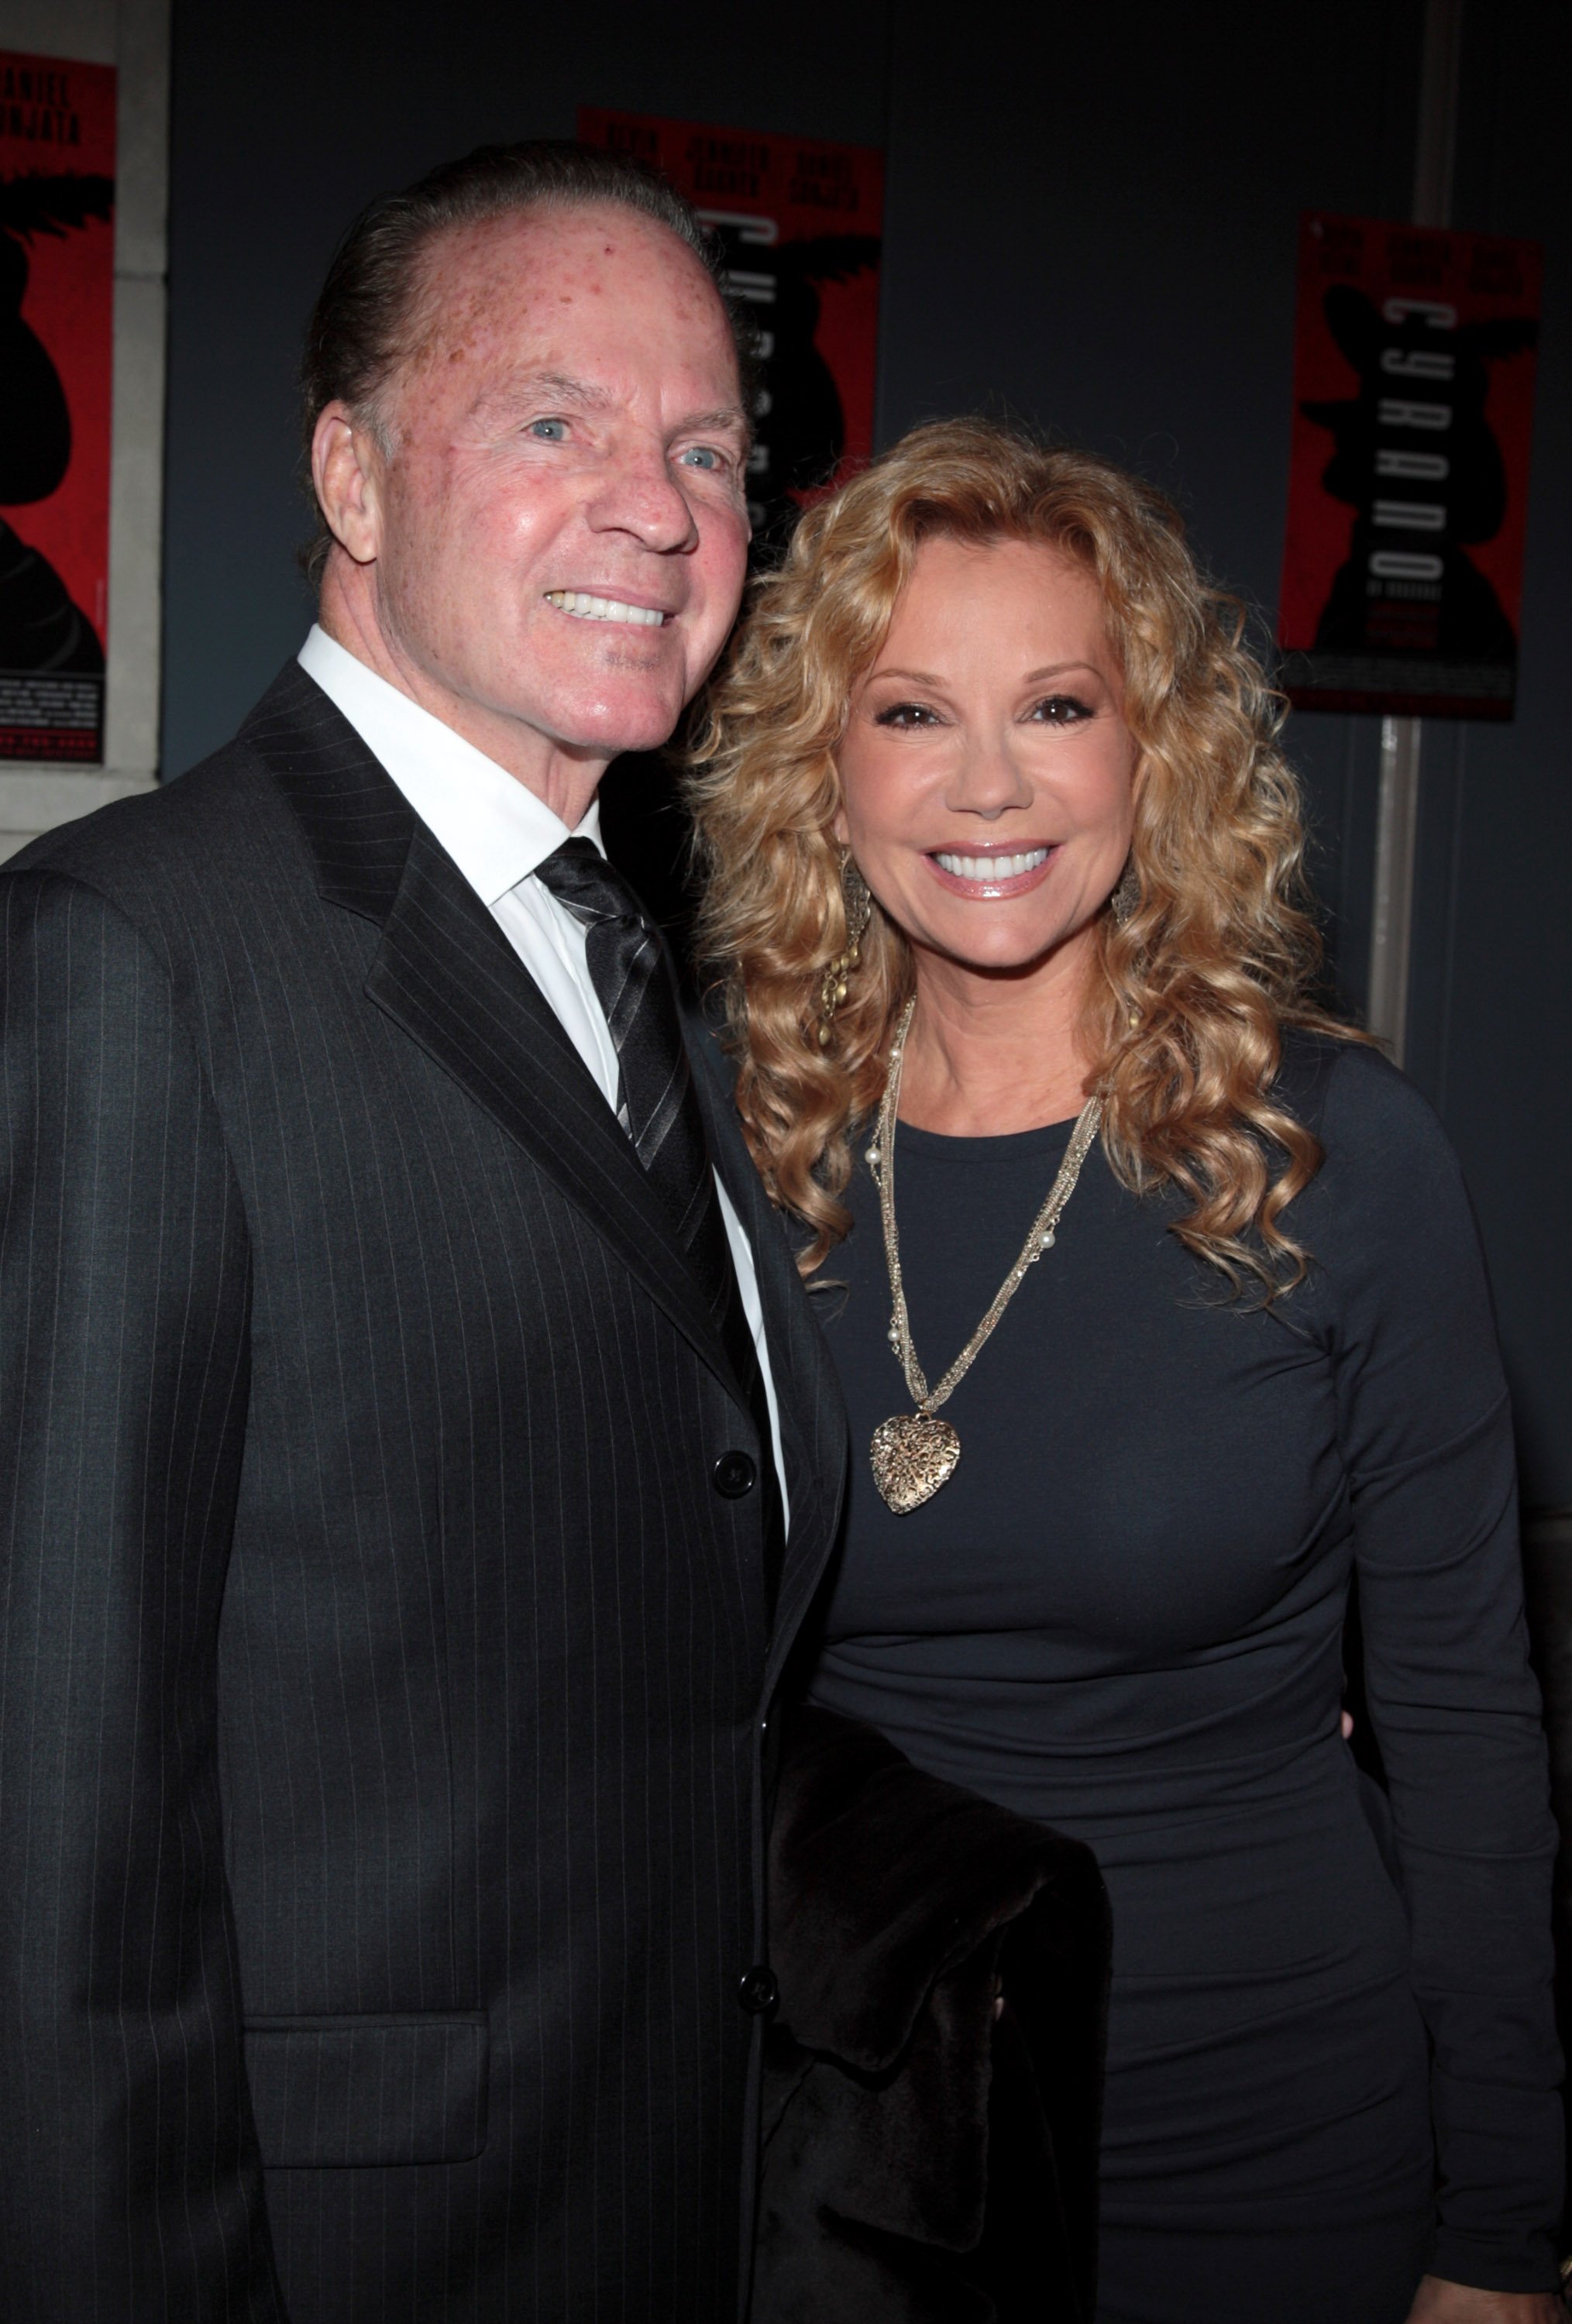 Kathie Lee Gifford and her husband Frank Gifford | Photo: Getty Images